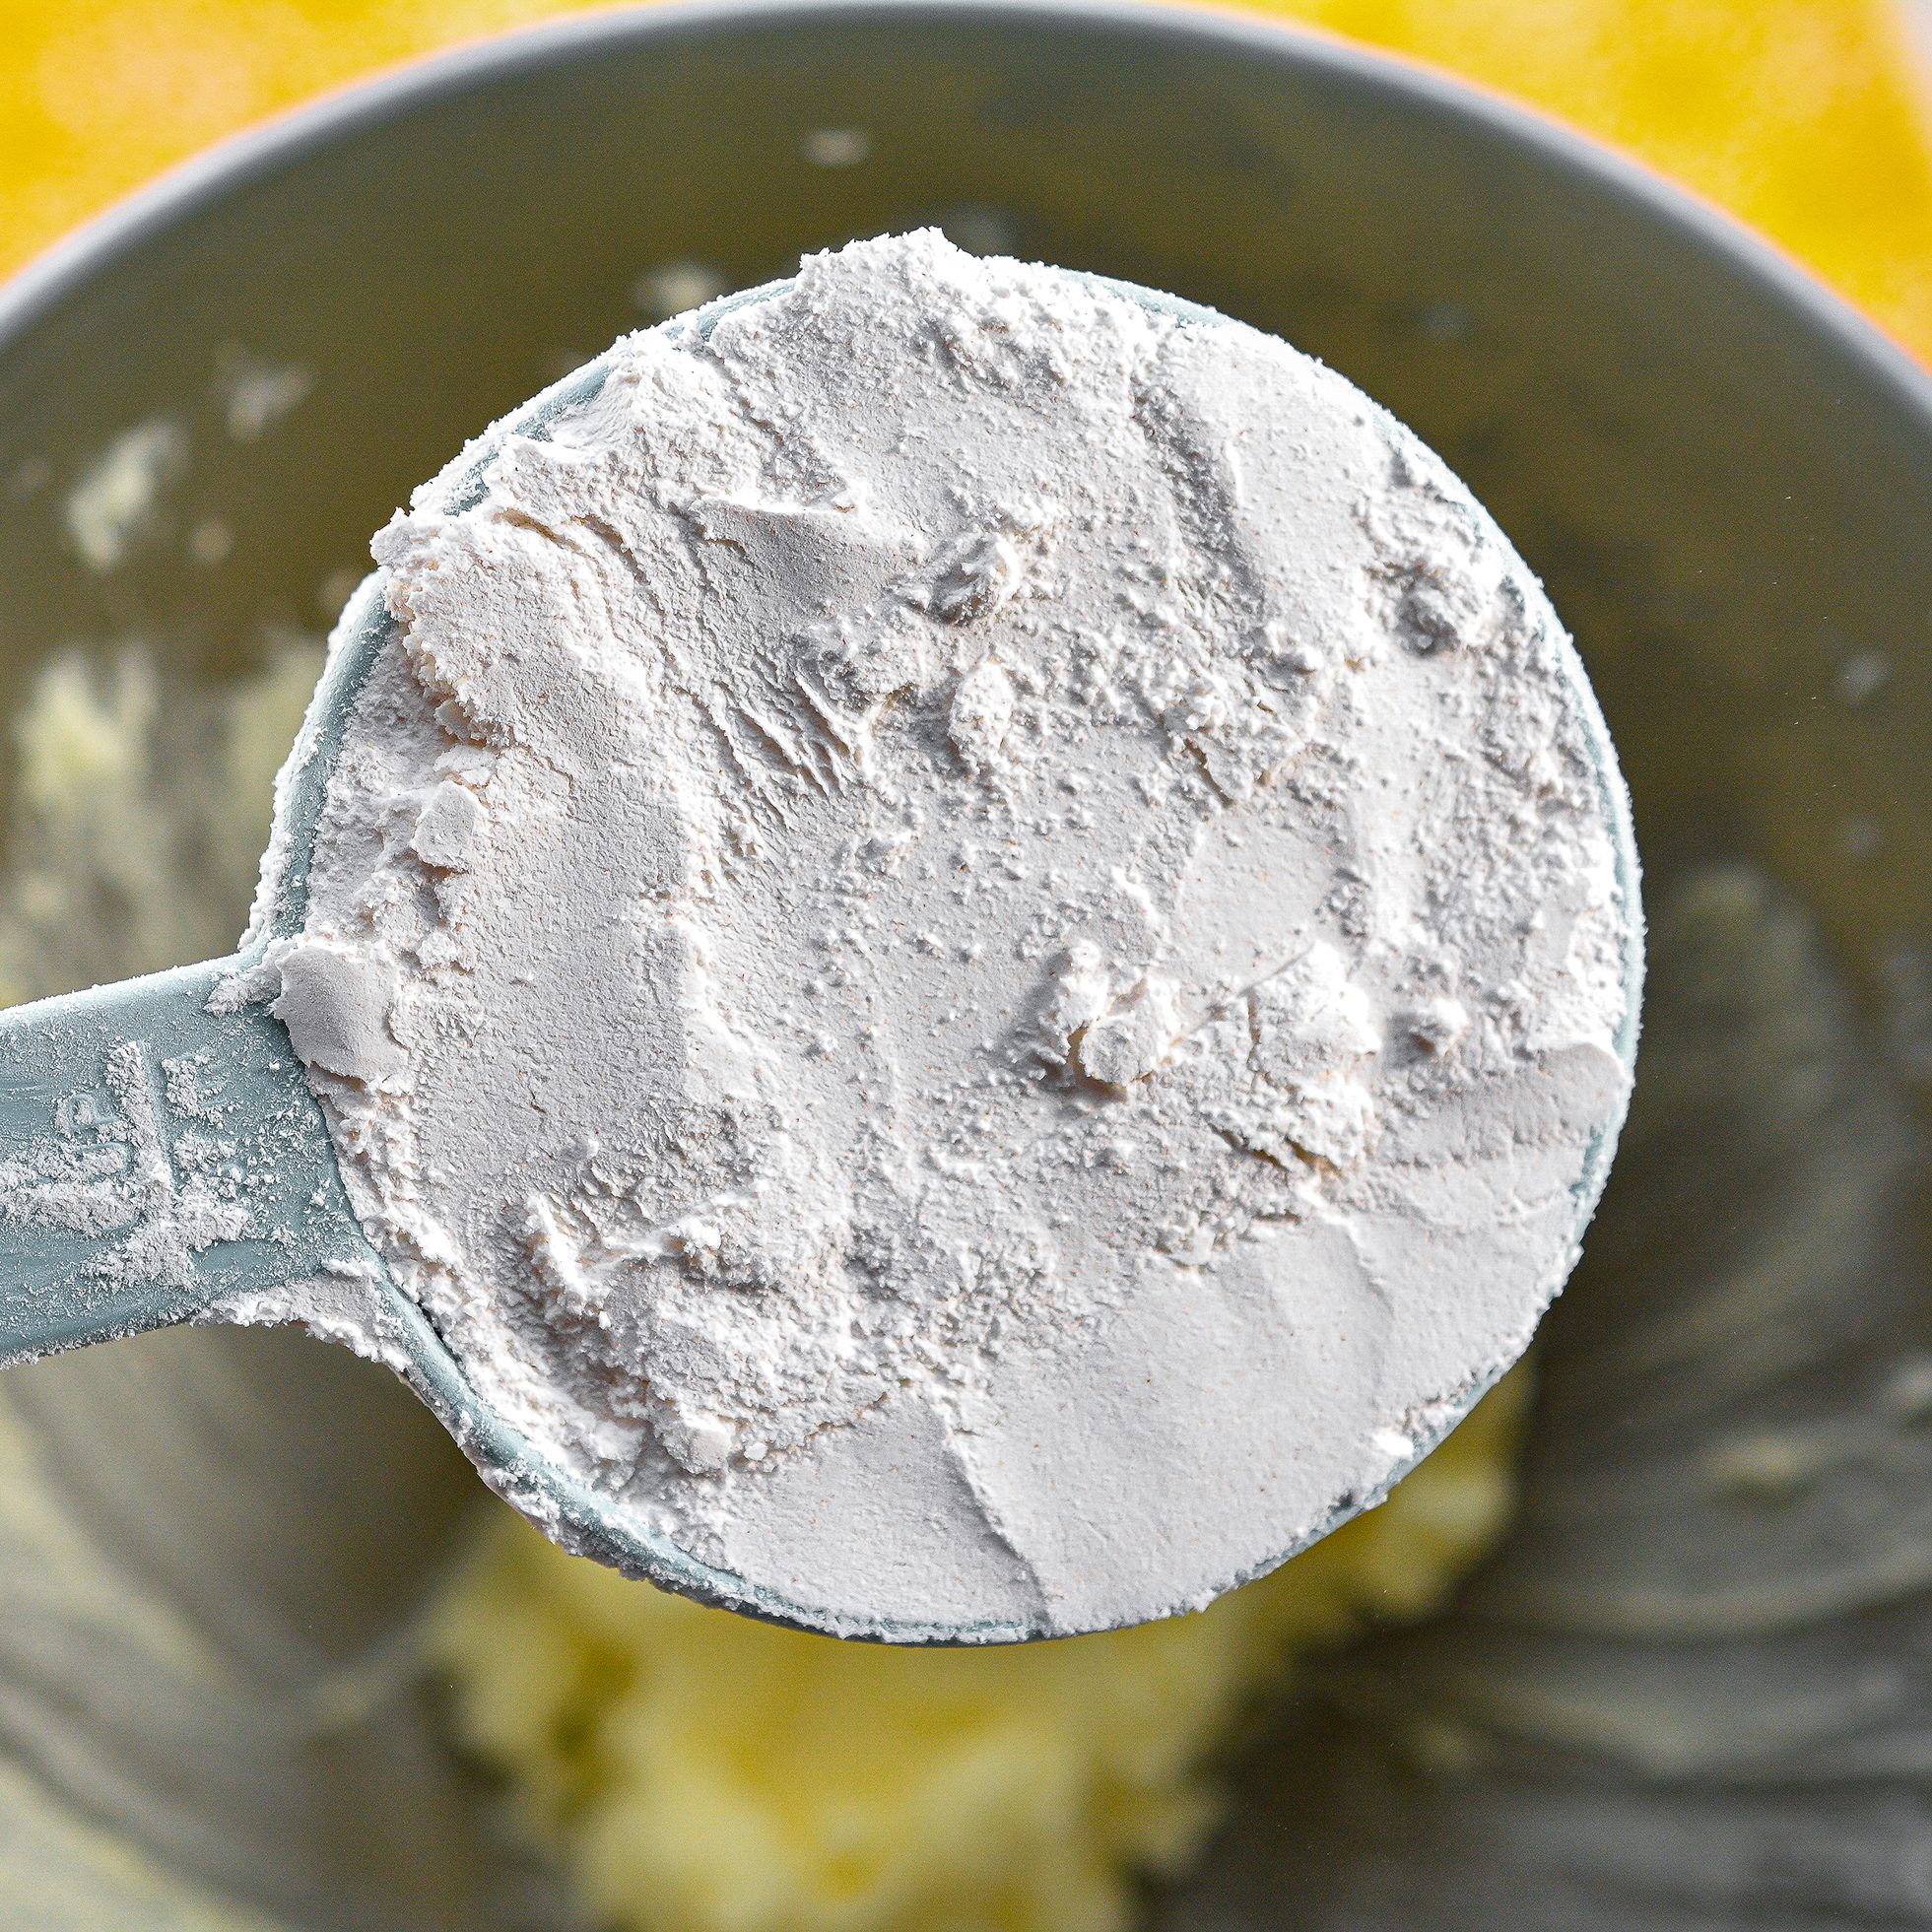 Mix in the flour, baking powder, eggs, lemon juice, and 1 tsp vanilla. Beat on high until well combined.